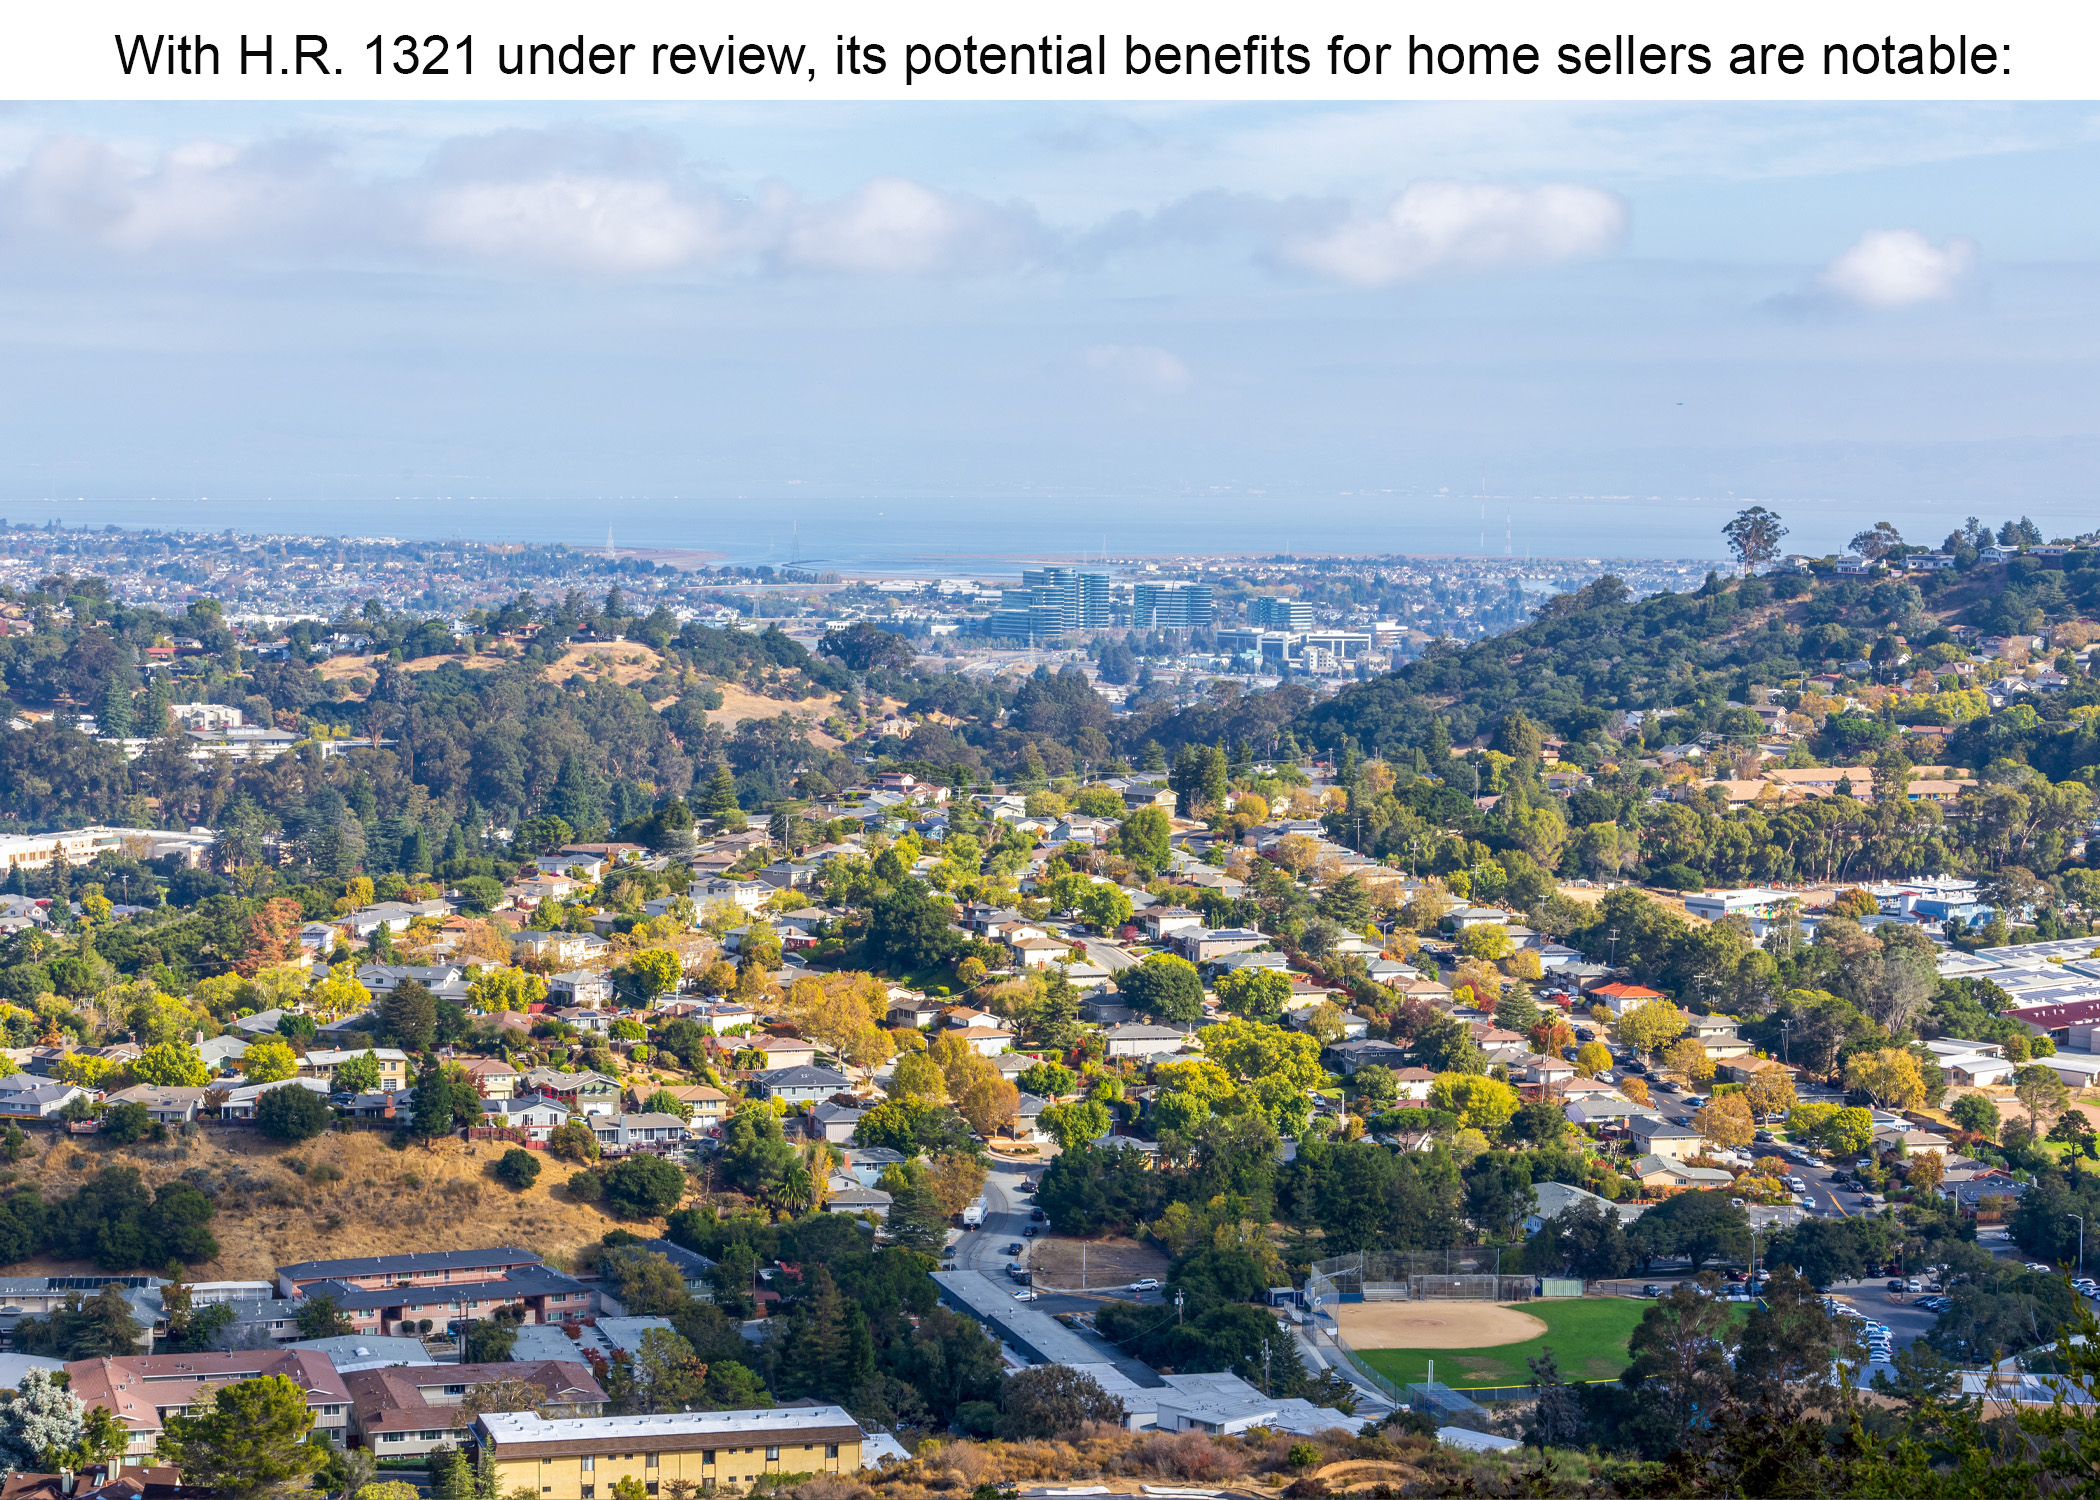 Patience May Pay For The Home Sellers - “More Homes Market Act”